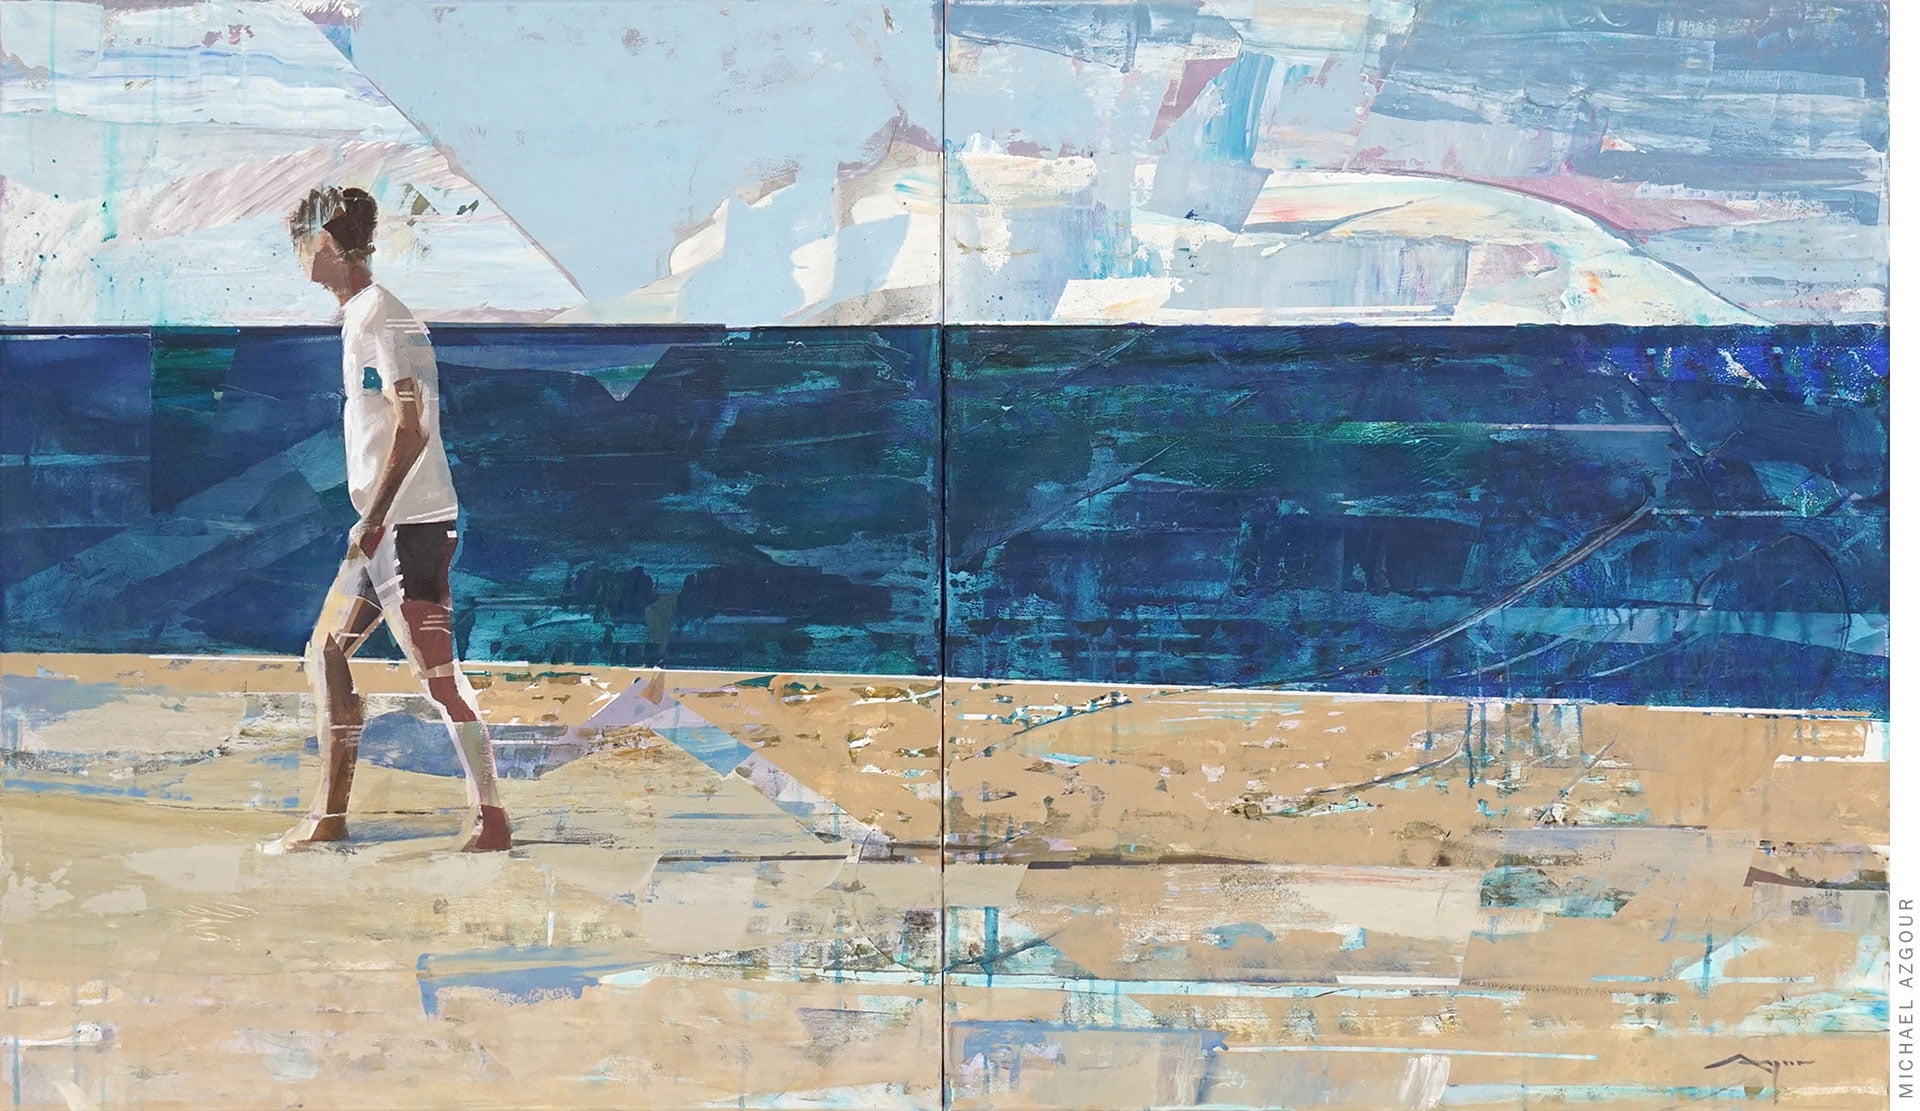 Original figurative painting by contemporary artist, Azgour, depicting a male figure walking on the shore